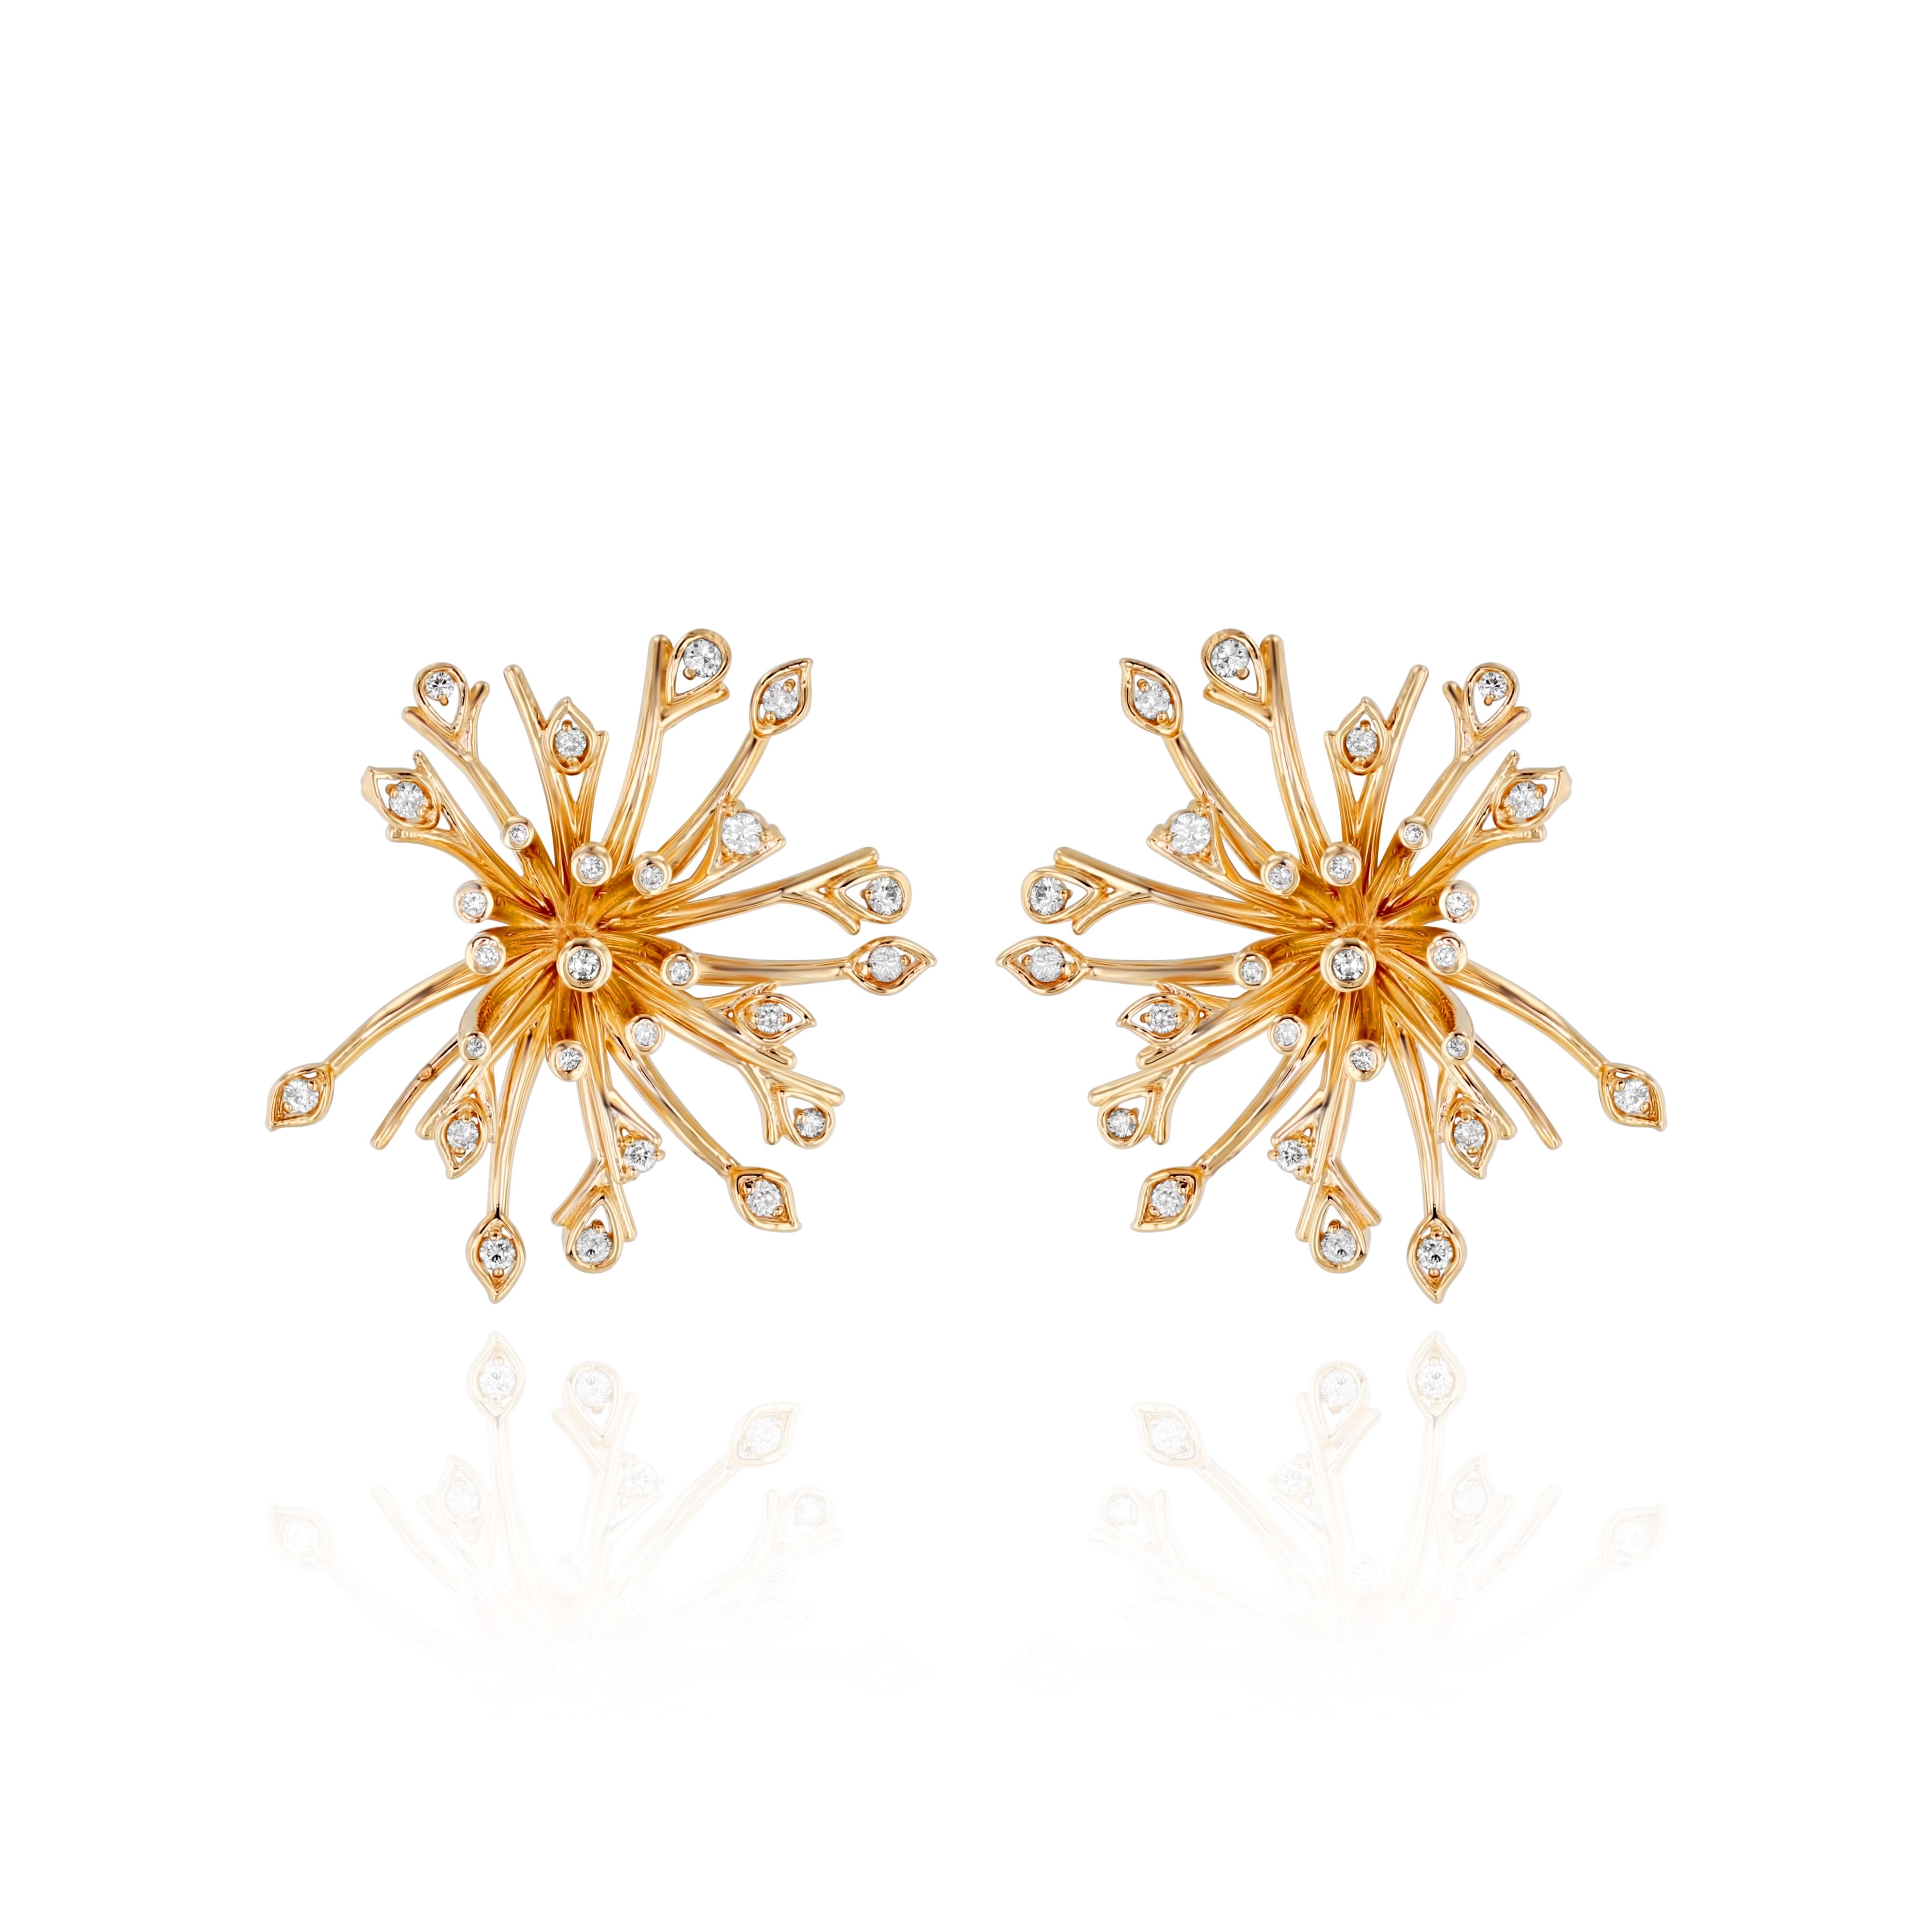 Yellow Gold Earrings, resembling a dandelion flower, with small round Diamonds, Large